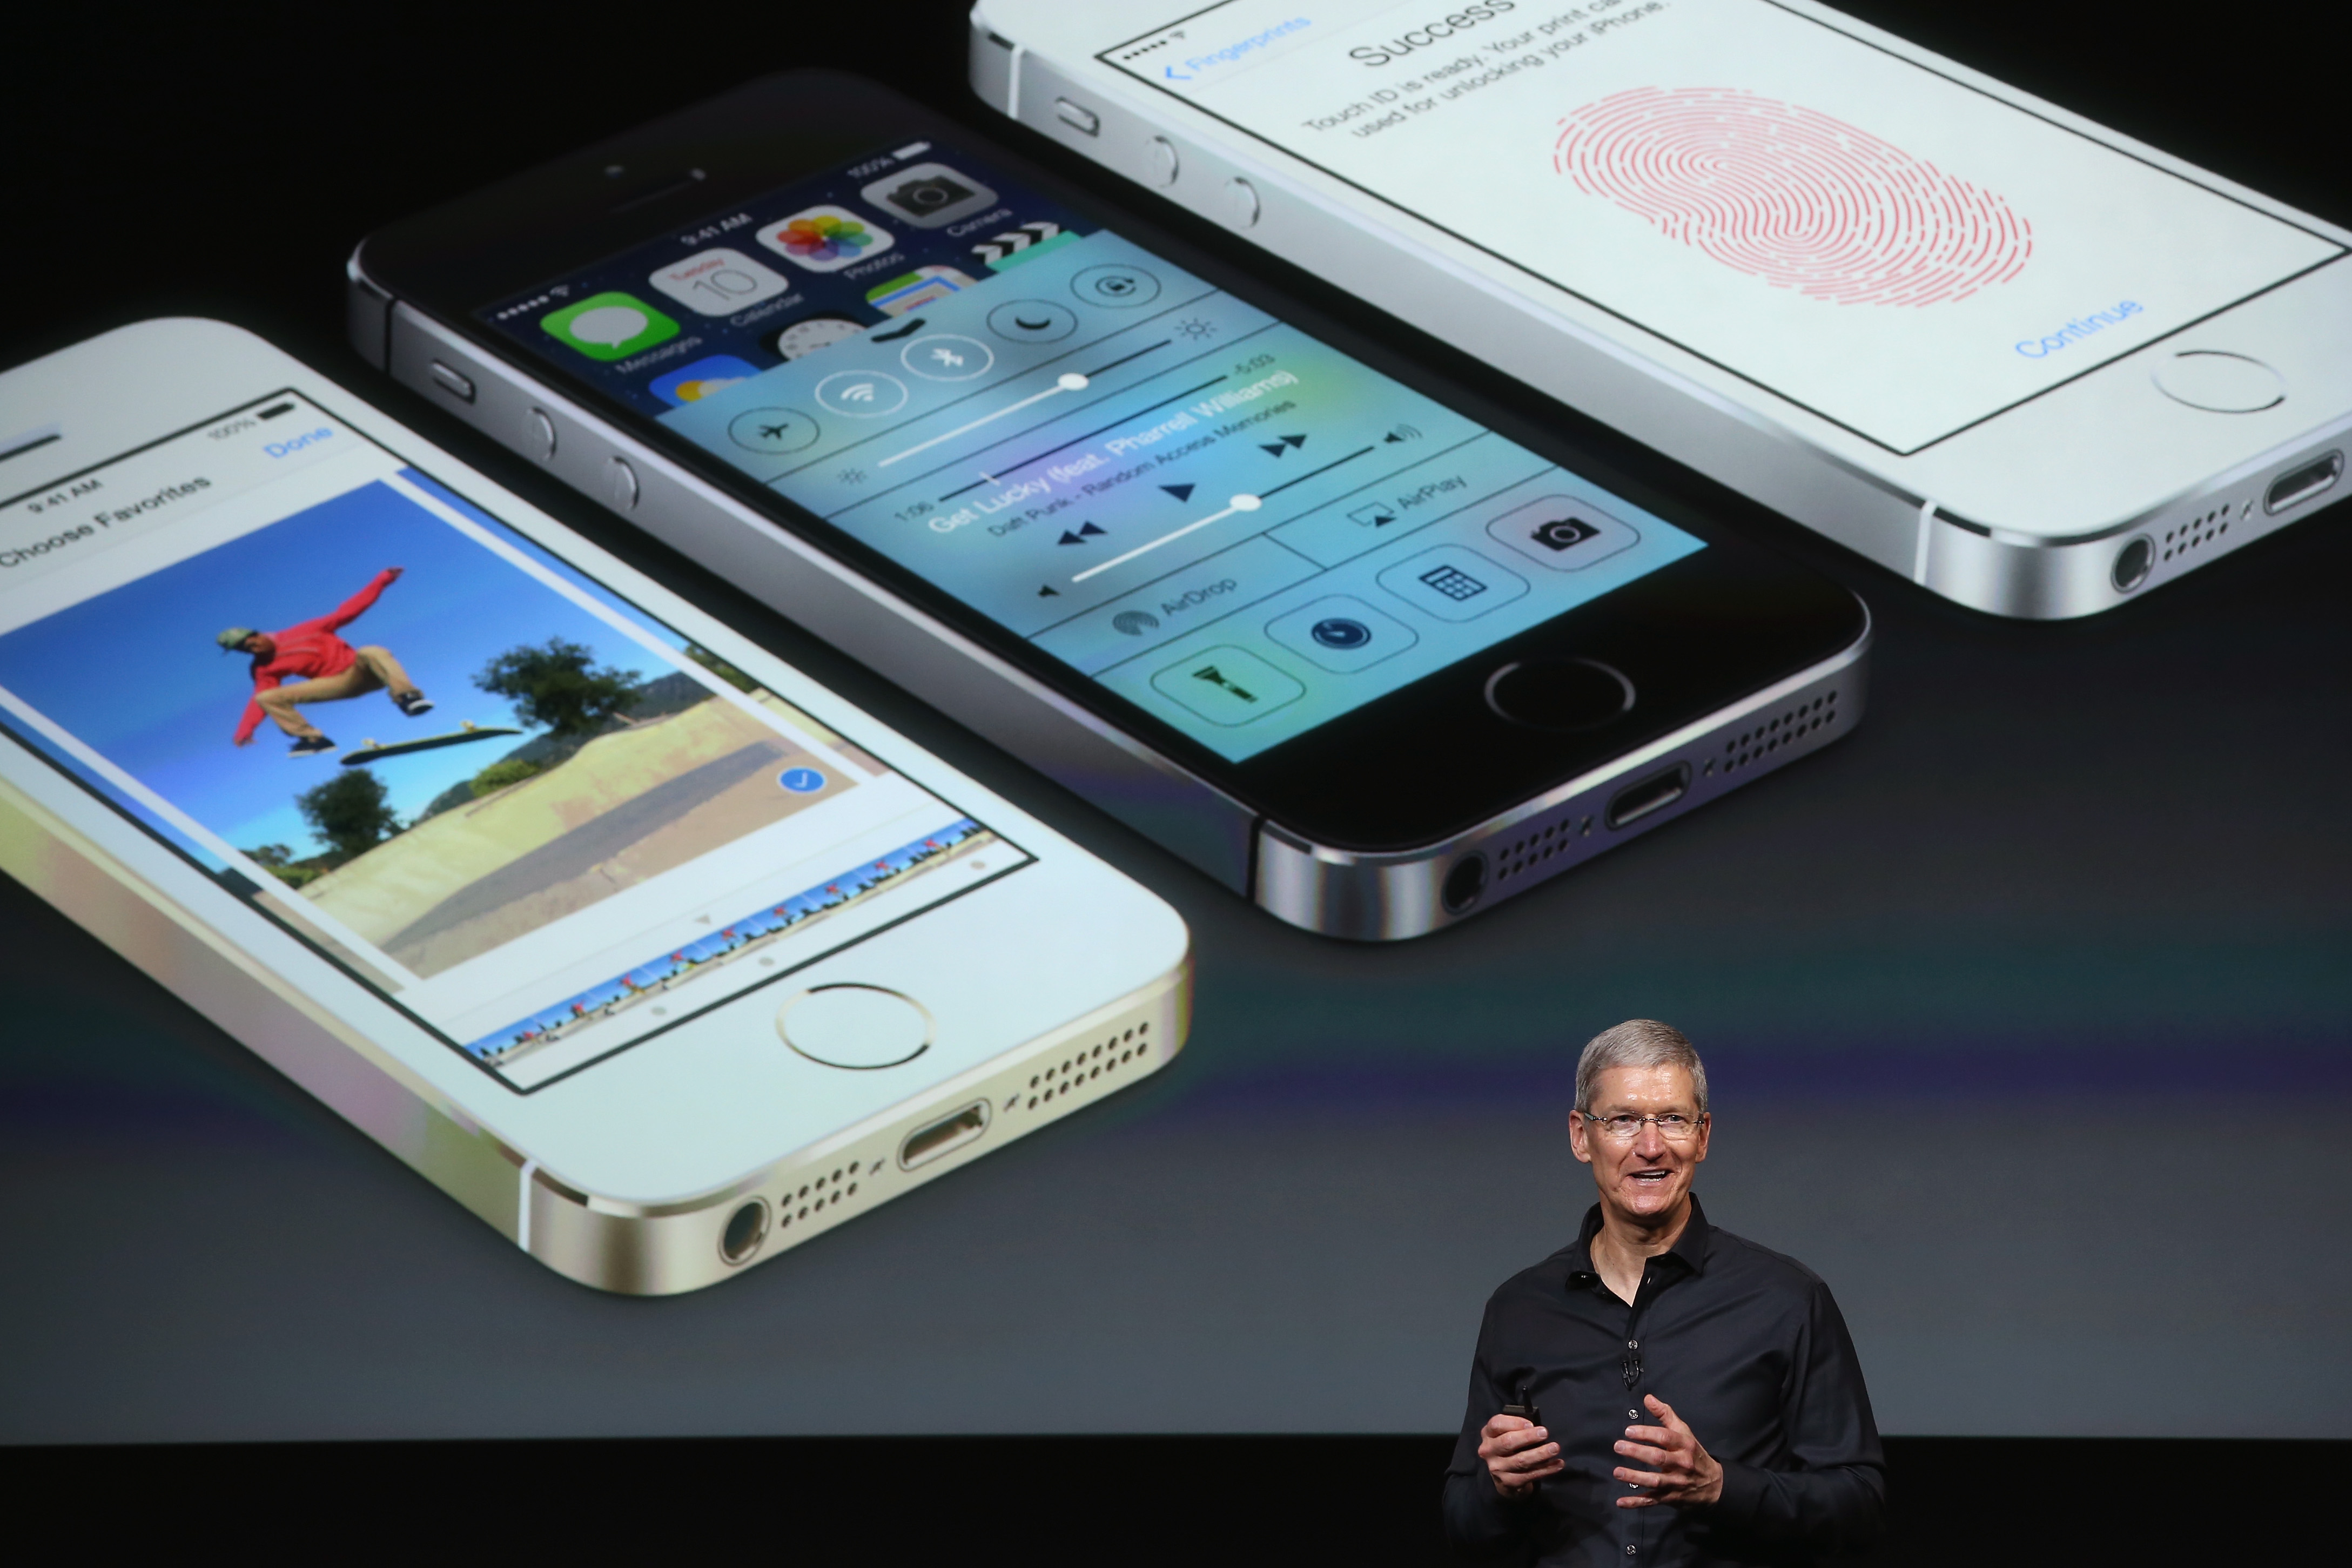 Apple CEO Tim Cook speaks about the new iPhone during an Apple product announcement at the Apple campus on September 10, 2013 in Cupertino, California.